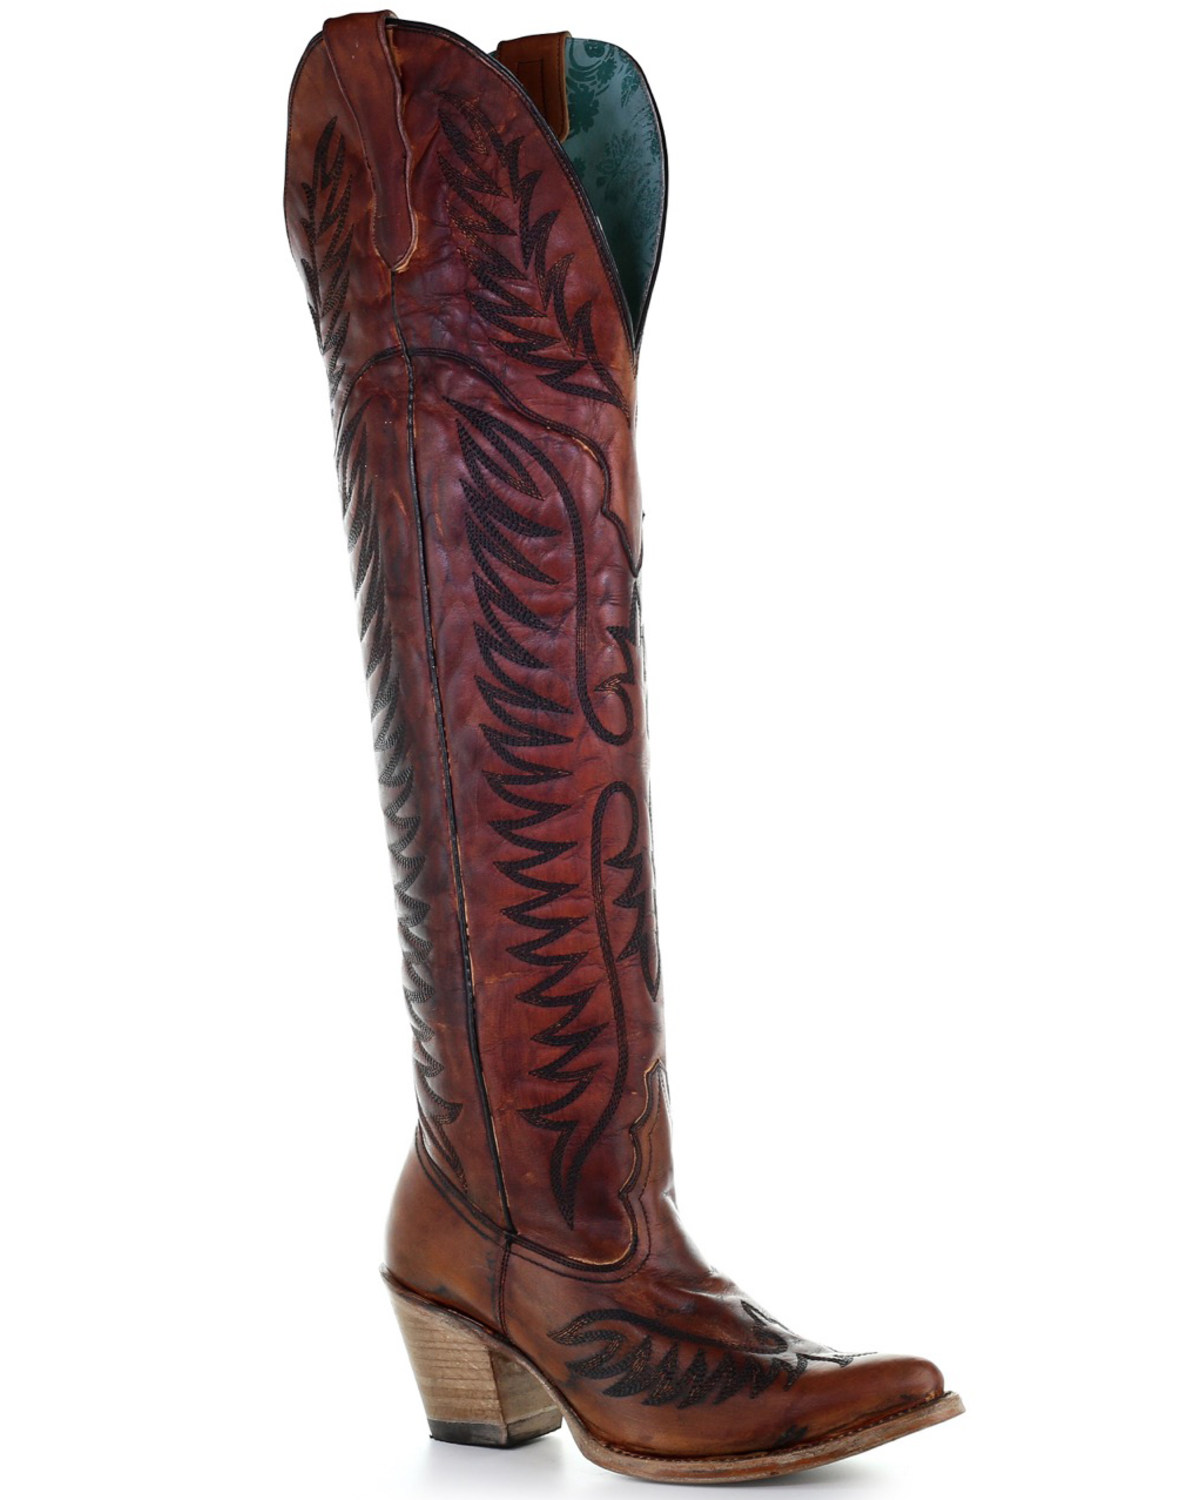 Corral Women's Cognac Embroidery Tall 